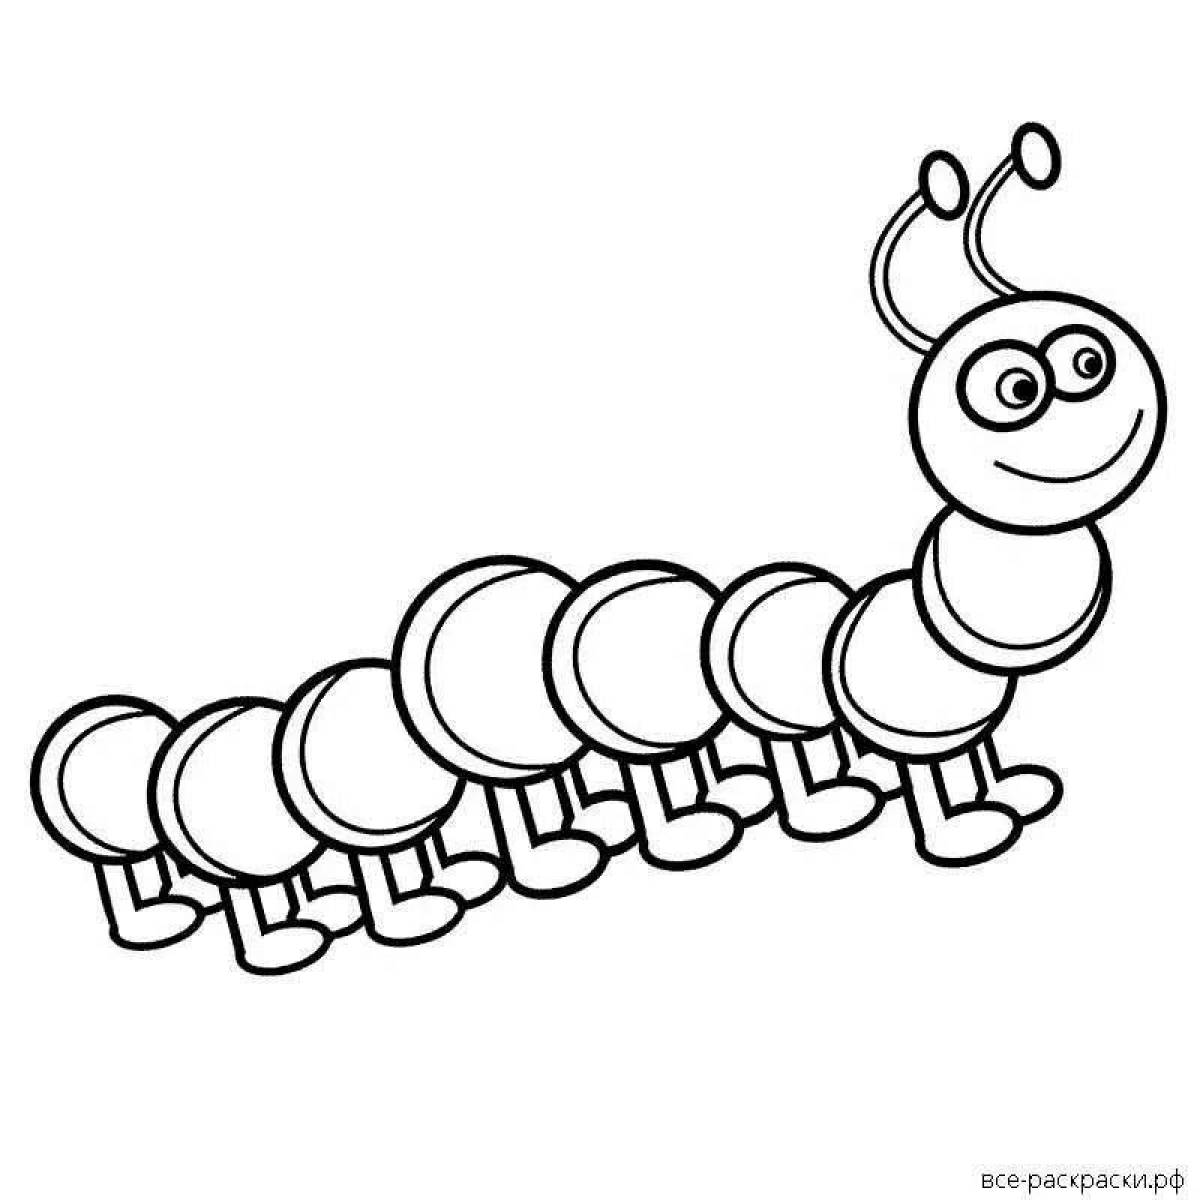 Coloring page adorable dog caterpillar